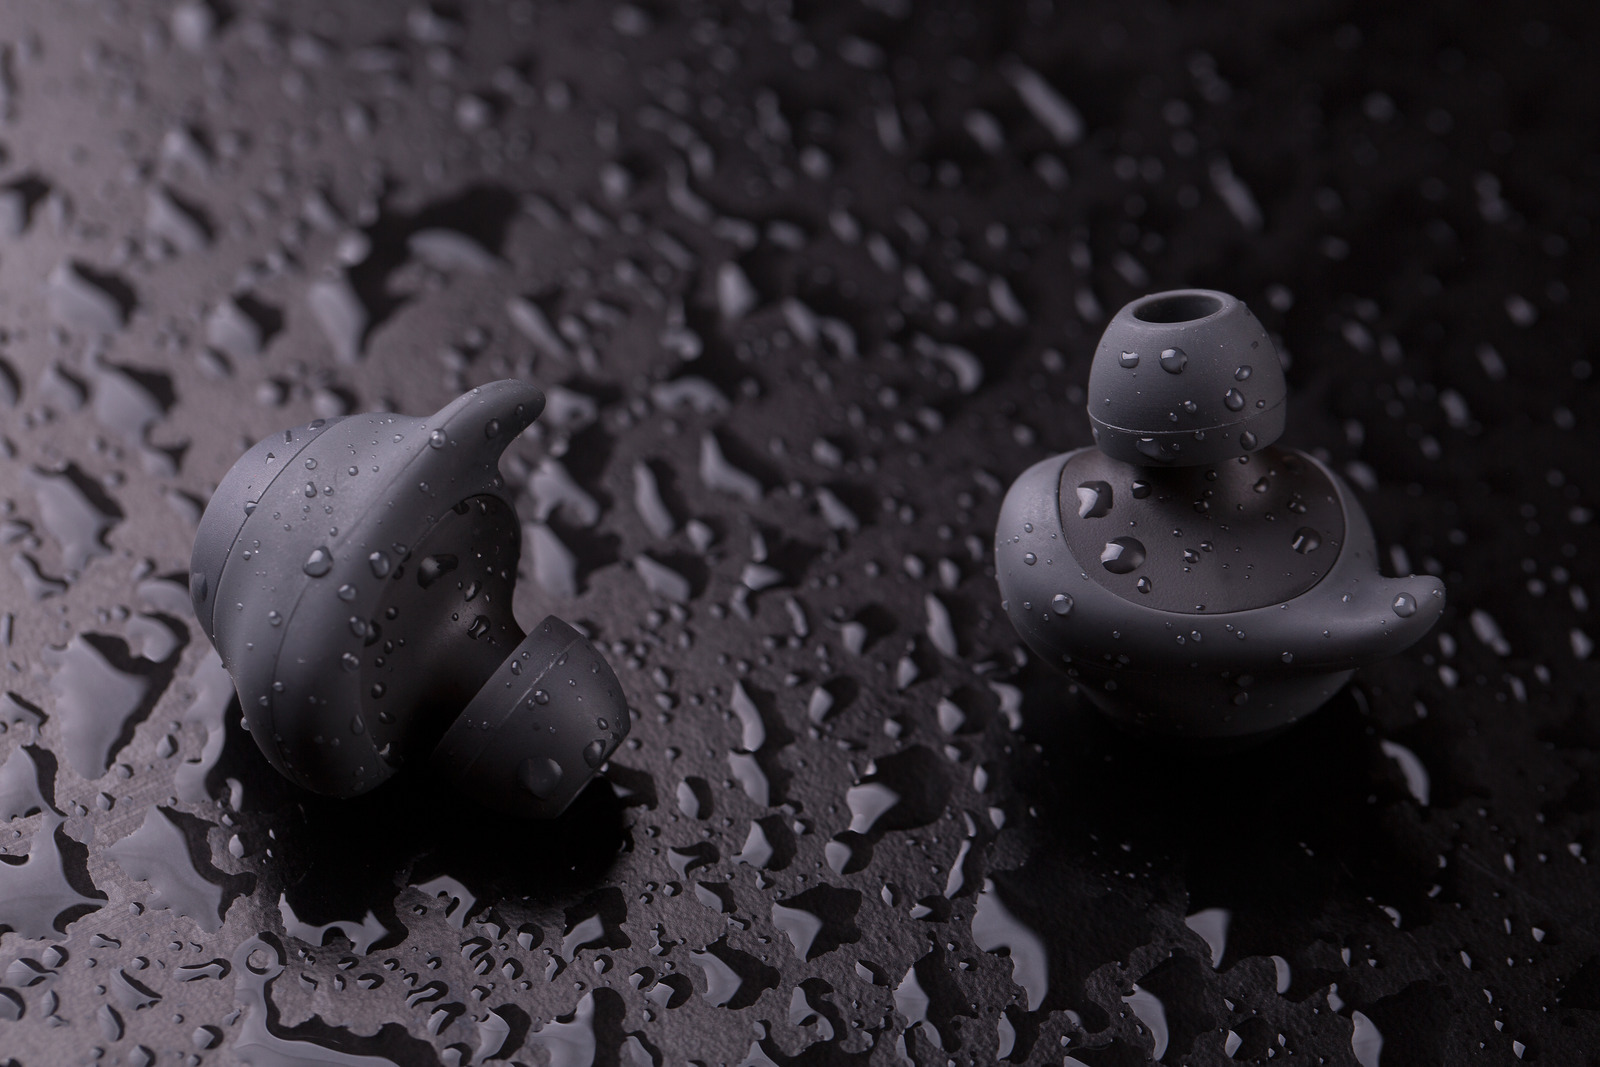 Intra-channel Bluetooth headphones on a dark background with water drops.